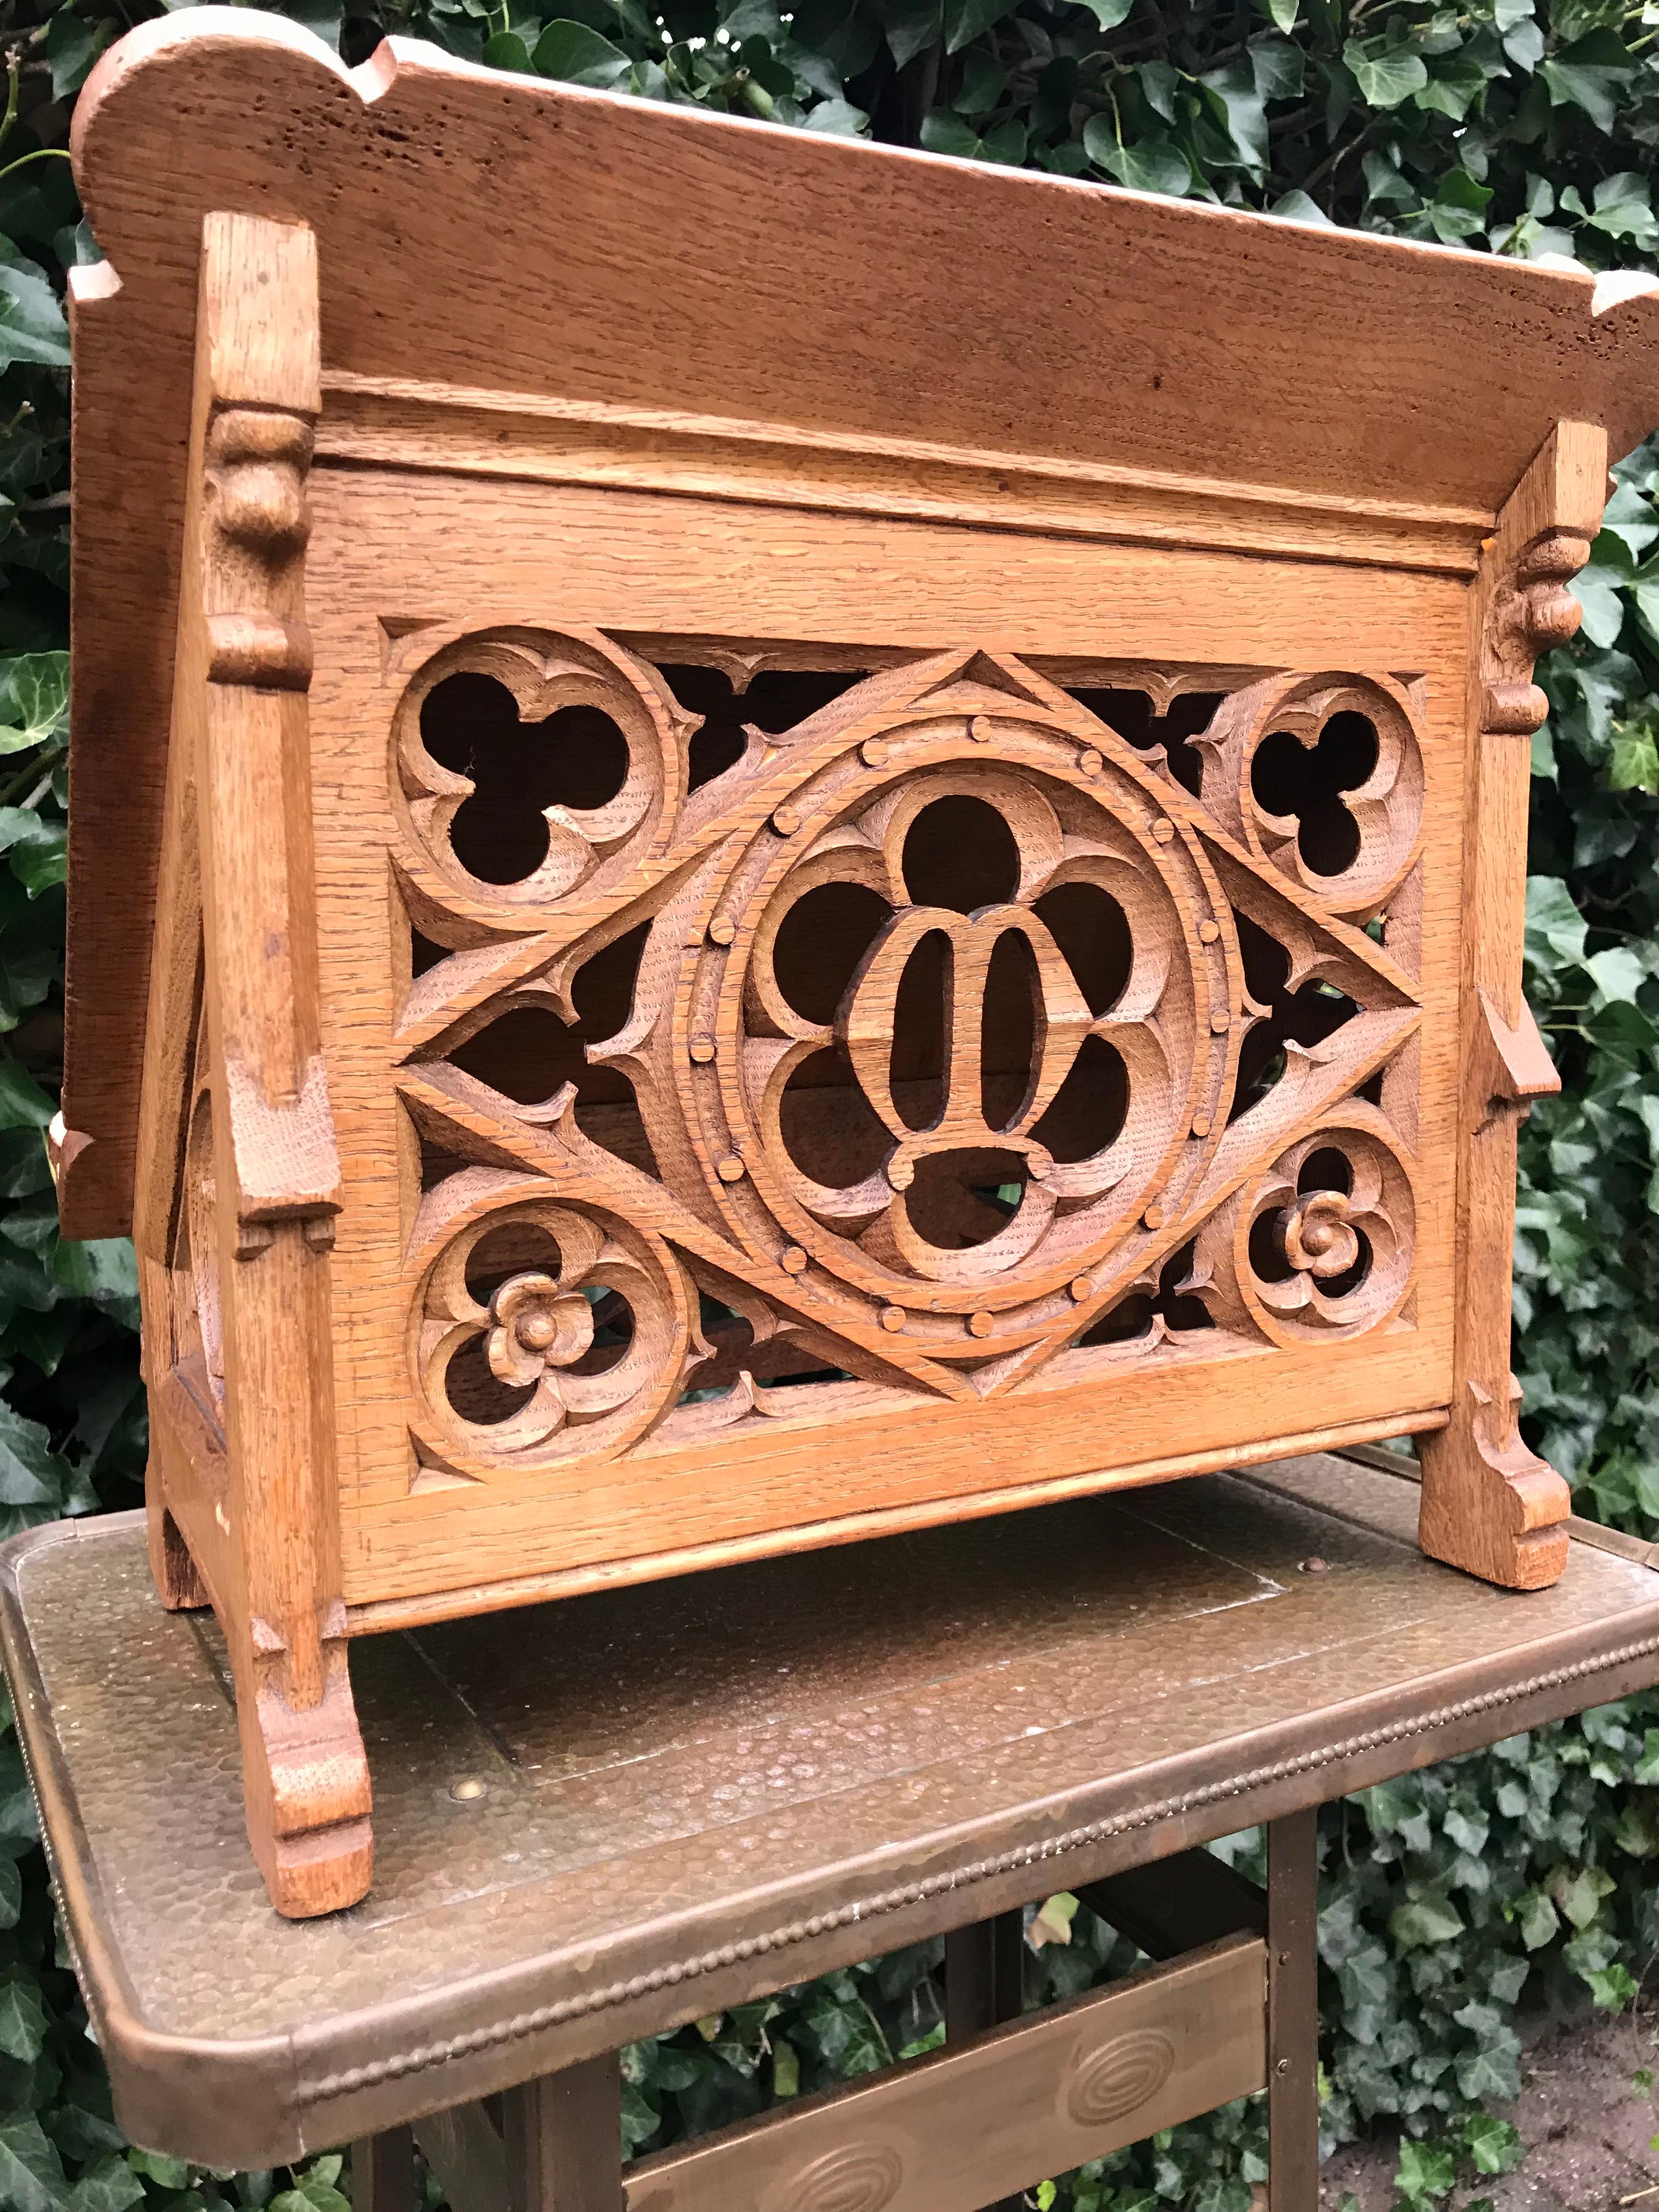 Practical size and meaningful, Gothic Revival bible stand.

This handcrafted and beautifully hand carved Gothic bible Stand dates from circa 1890-1900 and it is entirely made of solid oak. This rare example is in great condition and it has the most